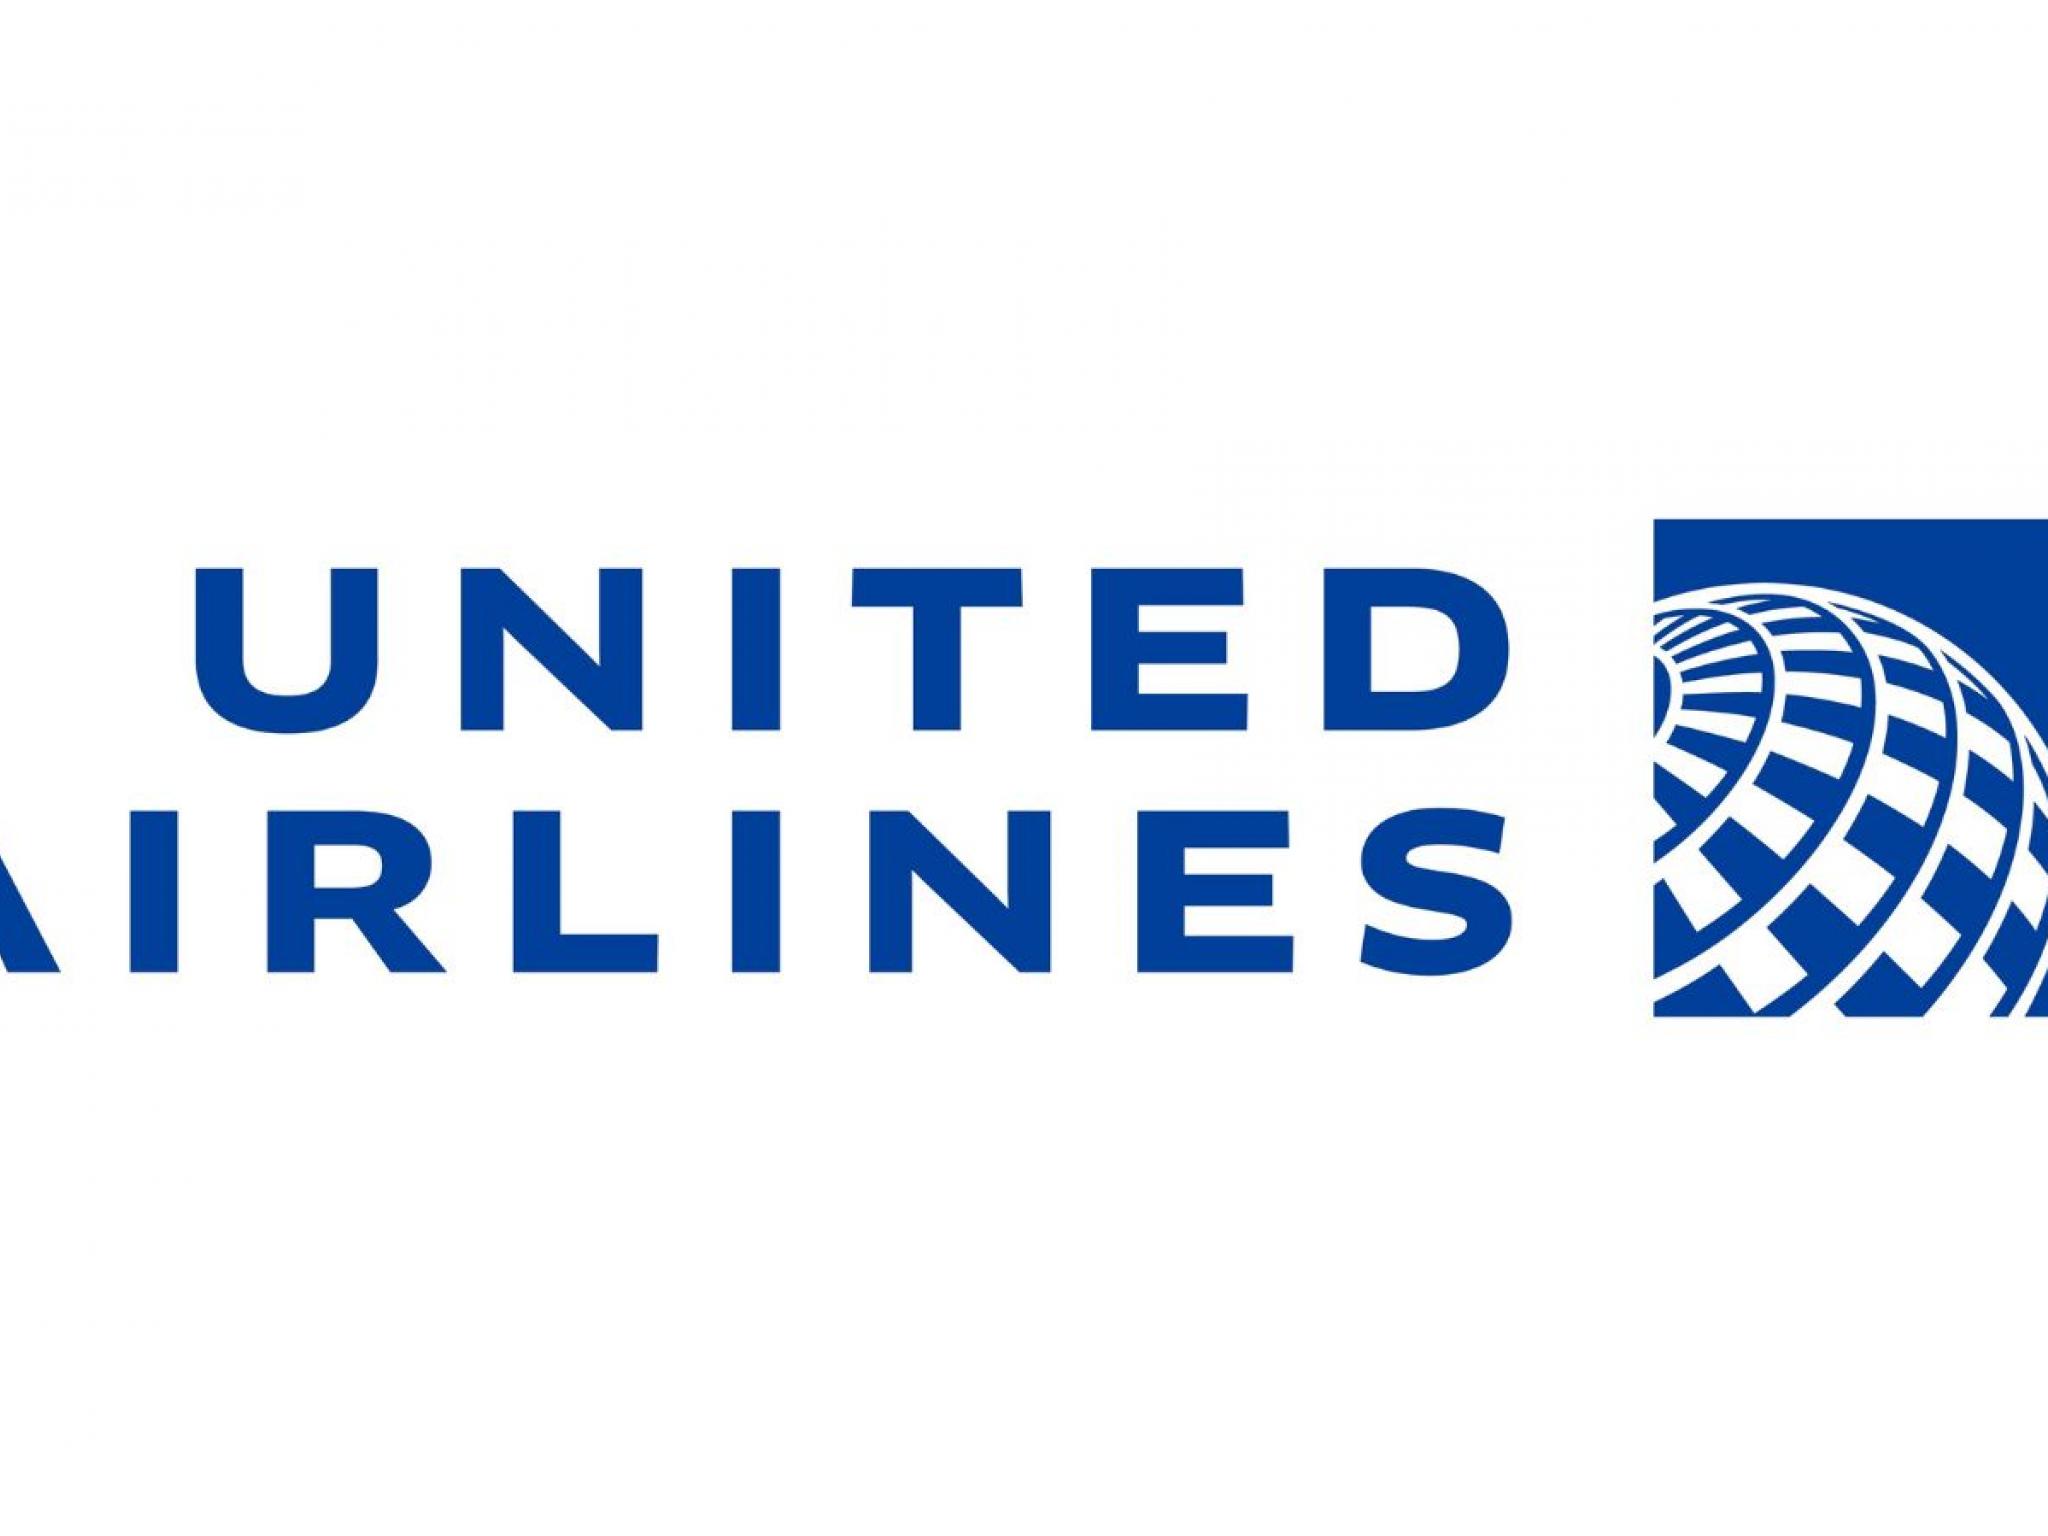  united-airlines-to-rally-over-30-here-are-10-top-analyst-forecasts-for-tuesday 